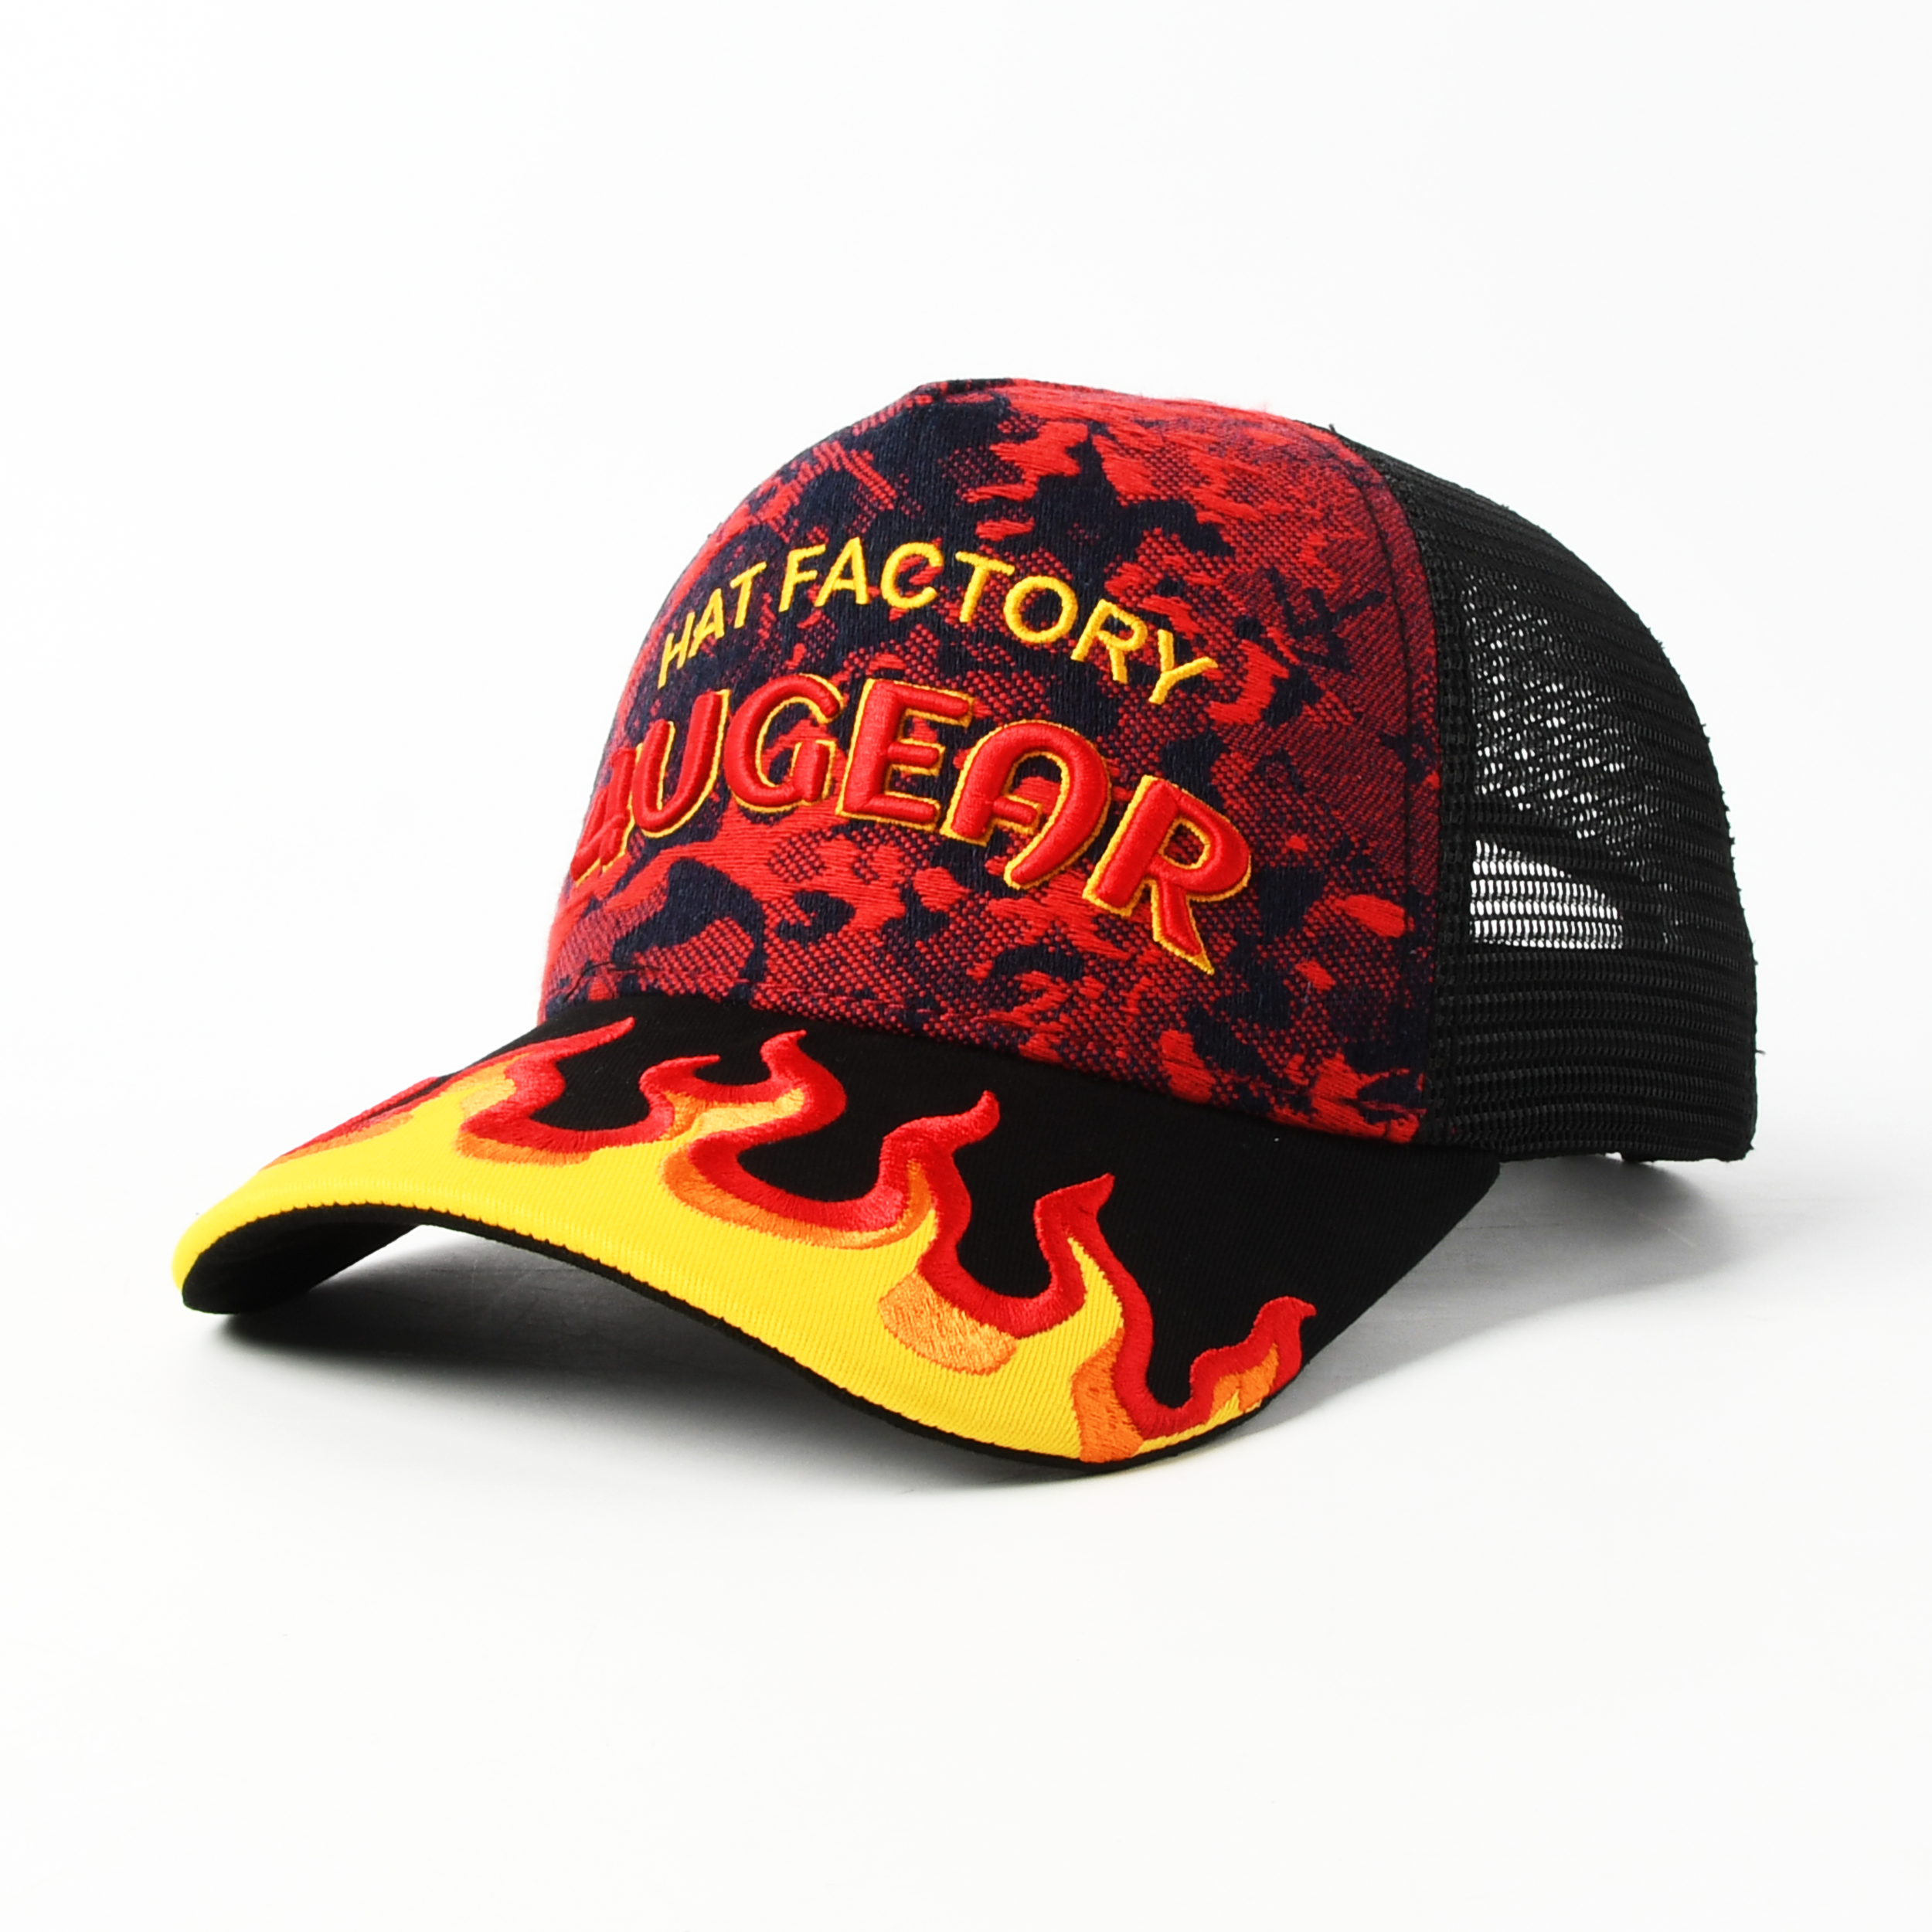 free sample delivery within 15 days Wholesale trucker custom mesh trucker hats small moq embroidery orange/white